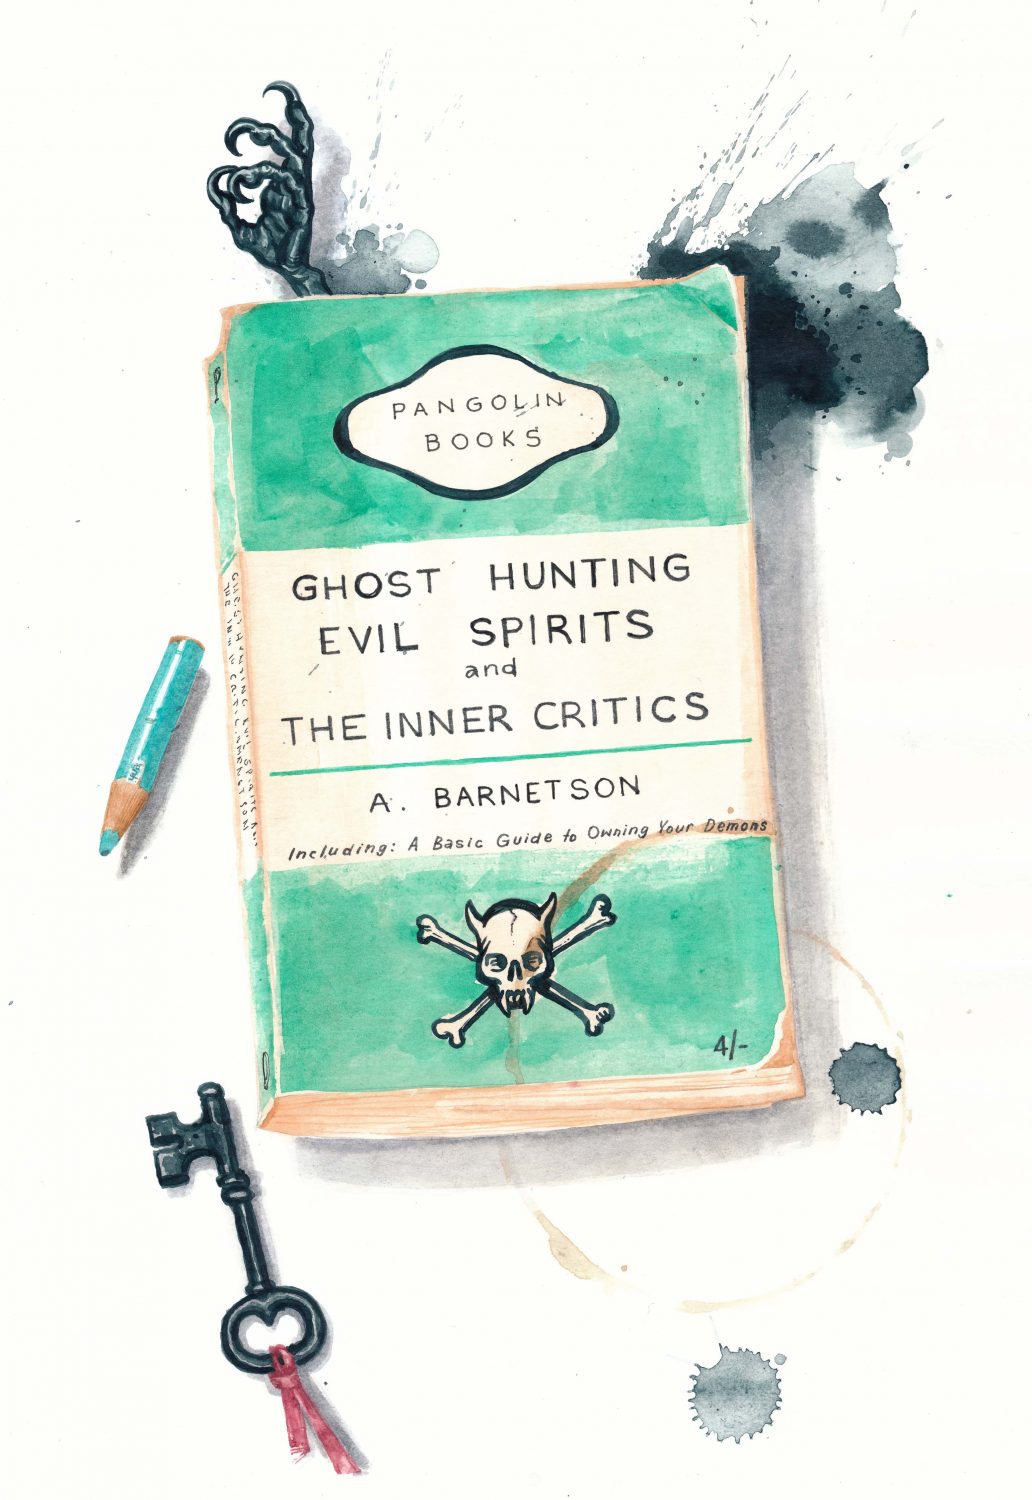 A realistic painting of a weathered paperback book titled Ghost Hunting, Evil Spirits and the Inner Critic. There is an old fashioned key, the stub of a turquoise pencil next to it and a gnarled little claw poking out of the book.